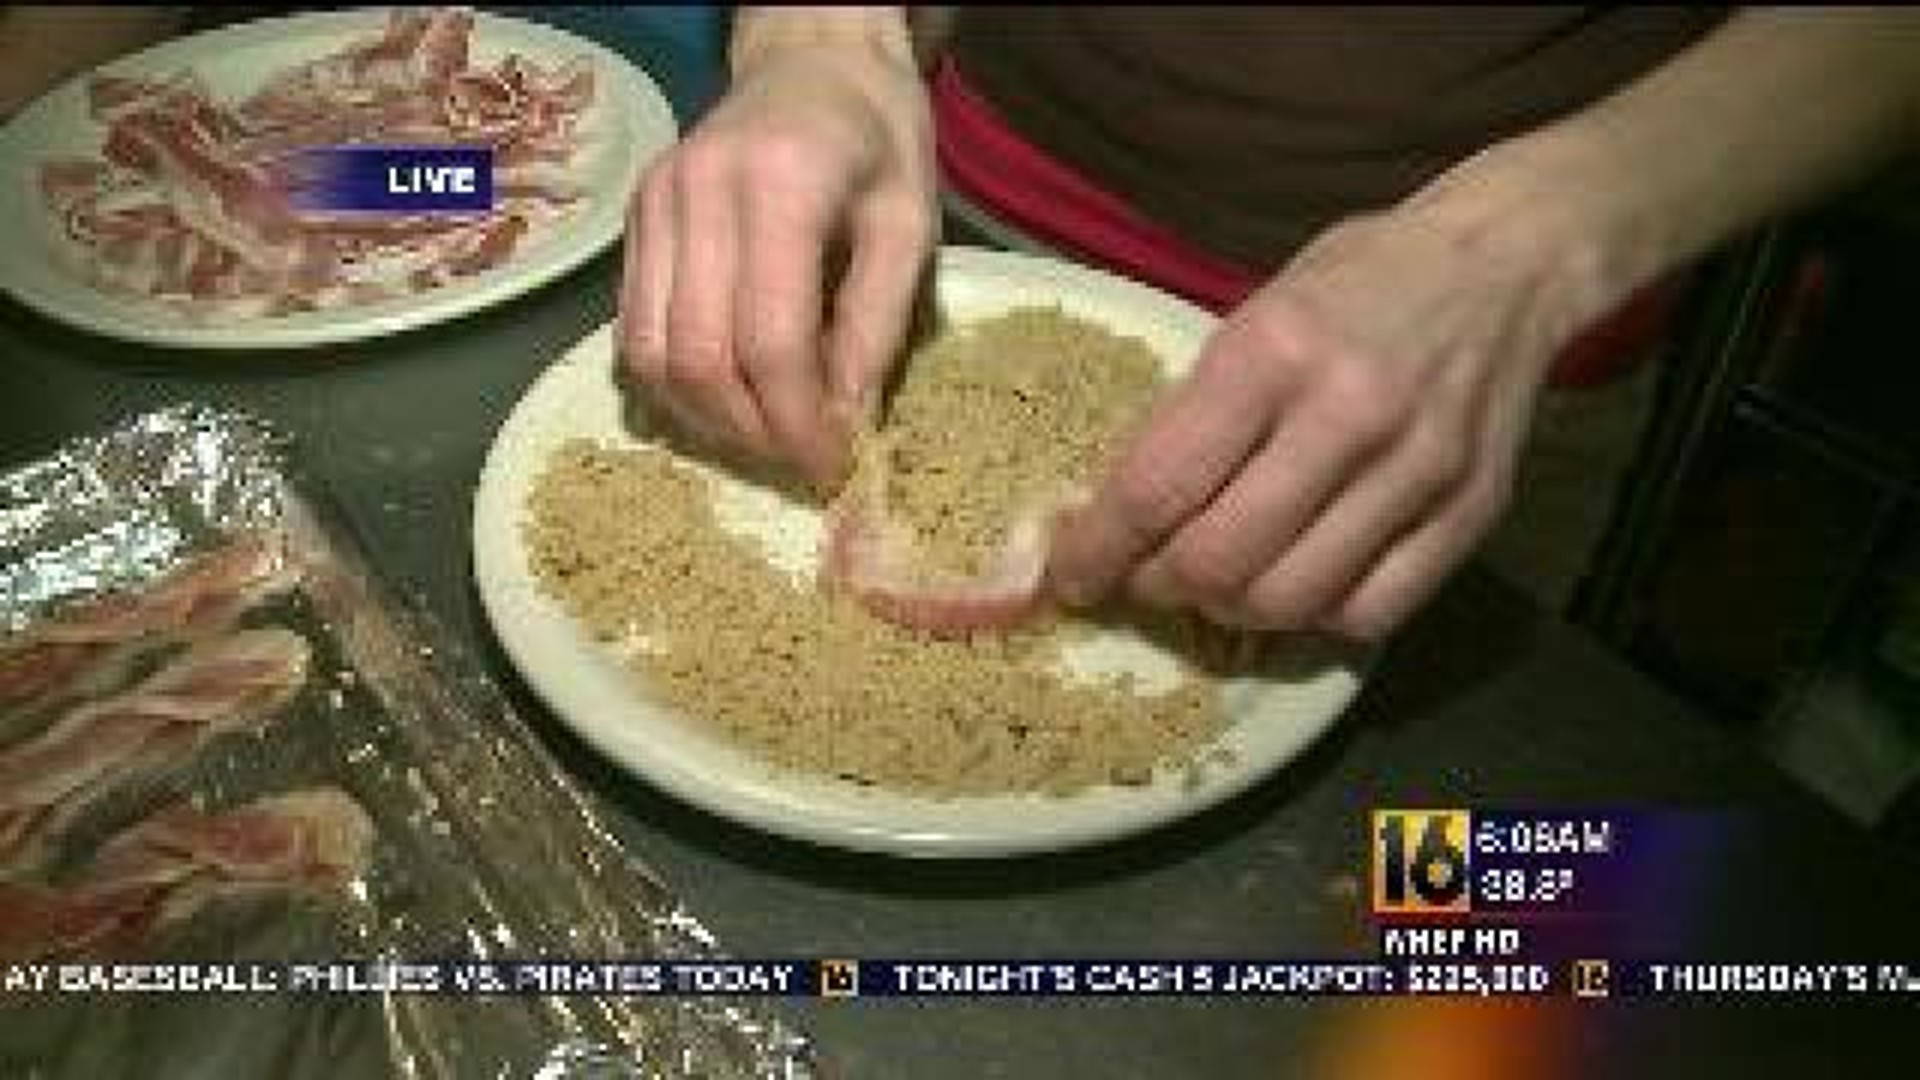 Easter Recipes: Brown Sugar Bacon Twists